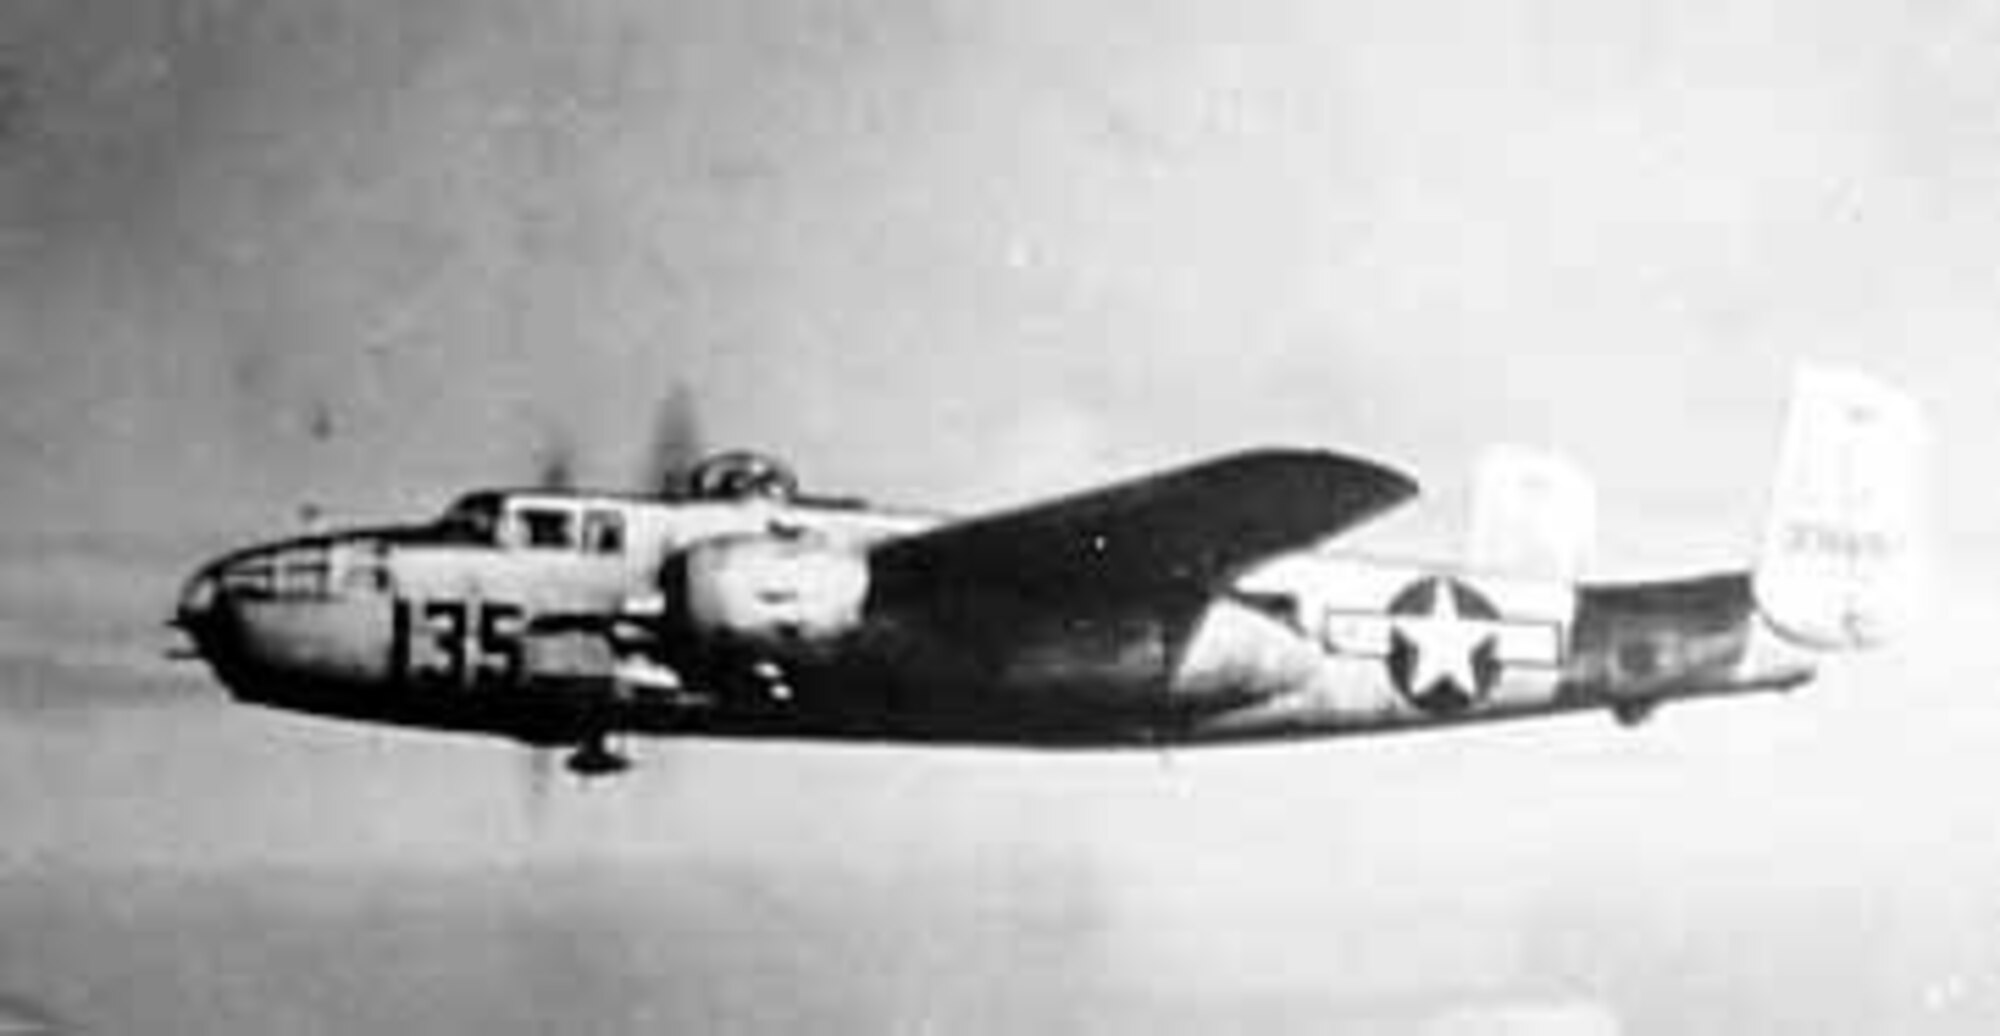 North American B-25J of the 477th Composite Group on a training mission. (U.S. Air Force photo)